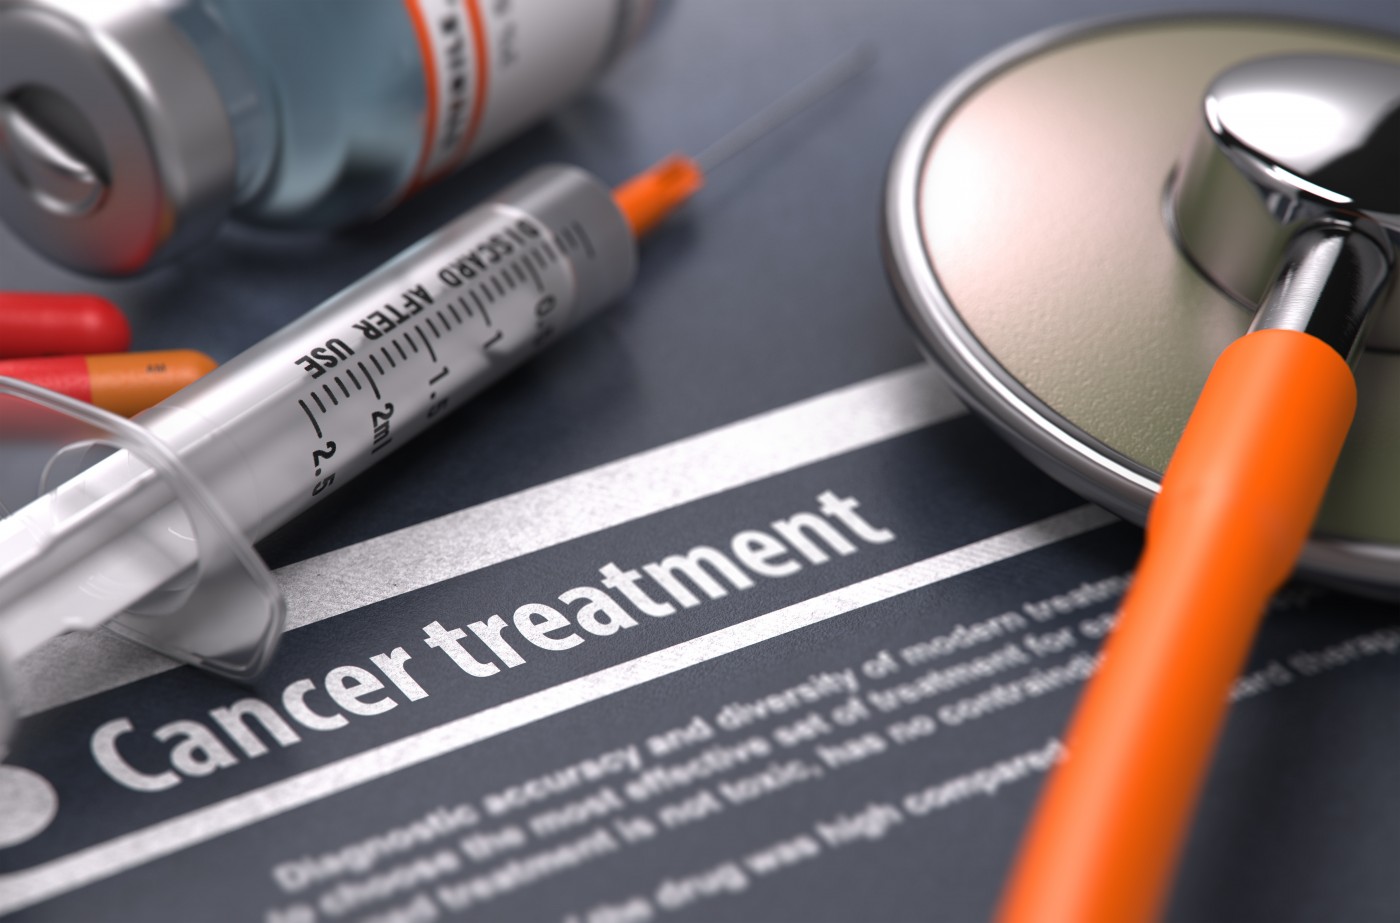 shortages of cancer therapies